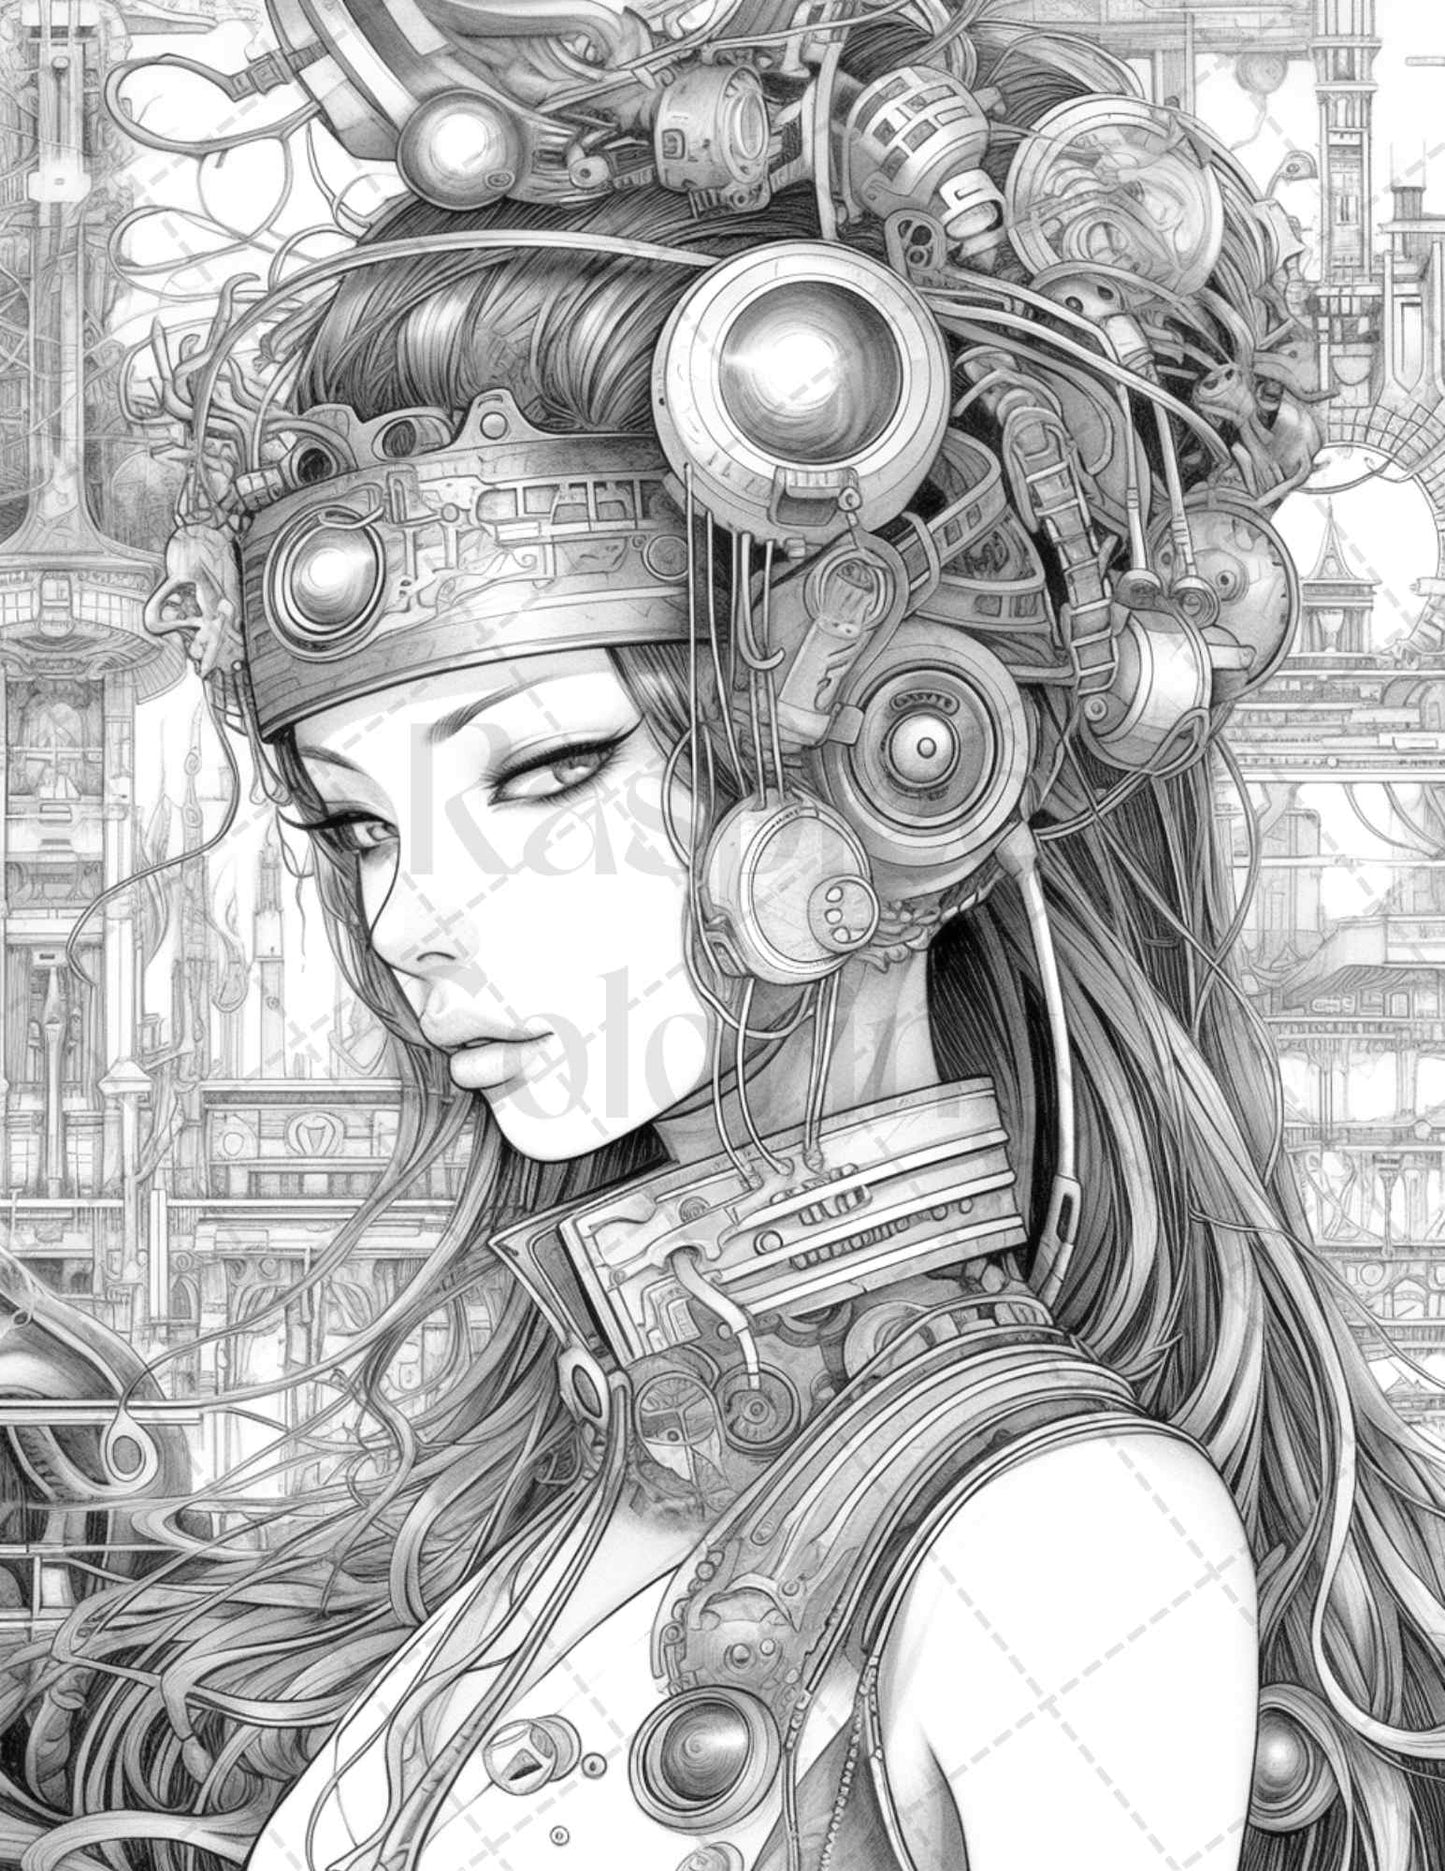 Cyborg girls grayscale coloring pages, printable coloring book for adults, stress relief artwork, unique grayscale illustrations, printable art for creative therapy, portrait coloring pages for adults